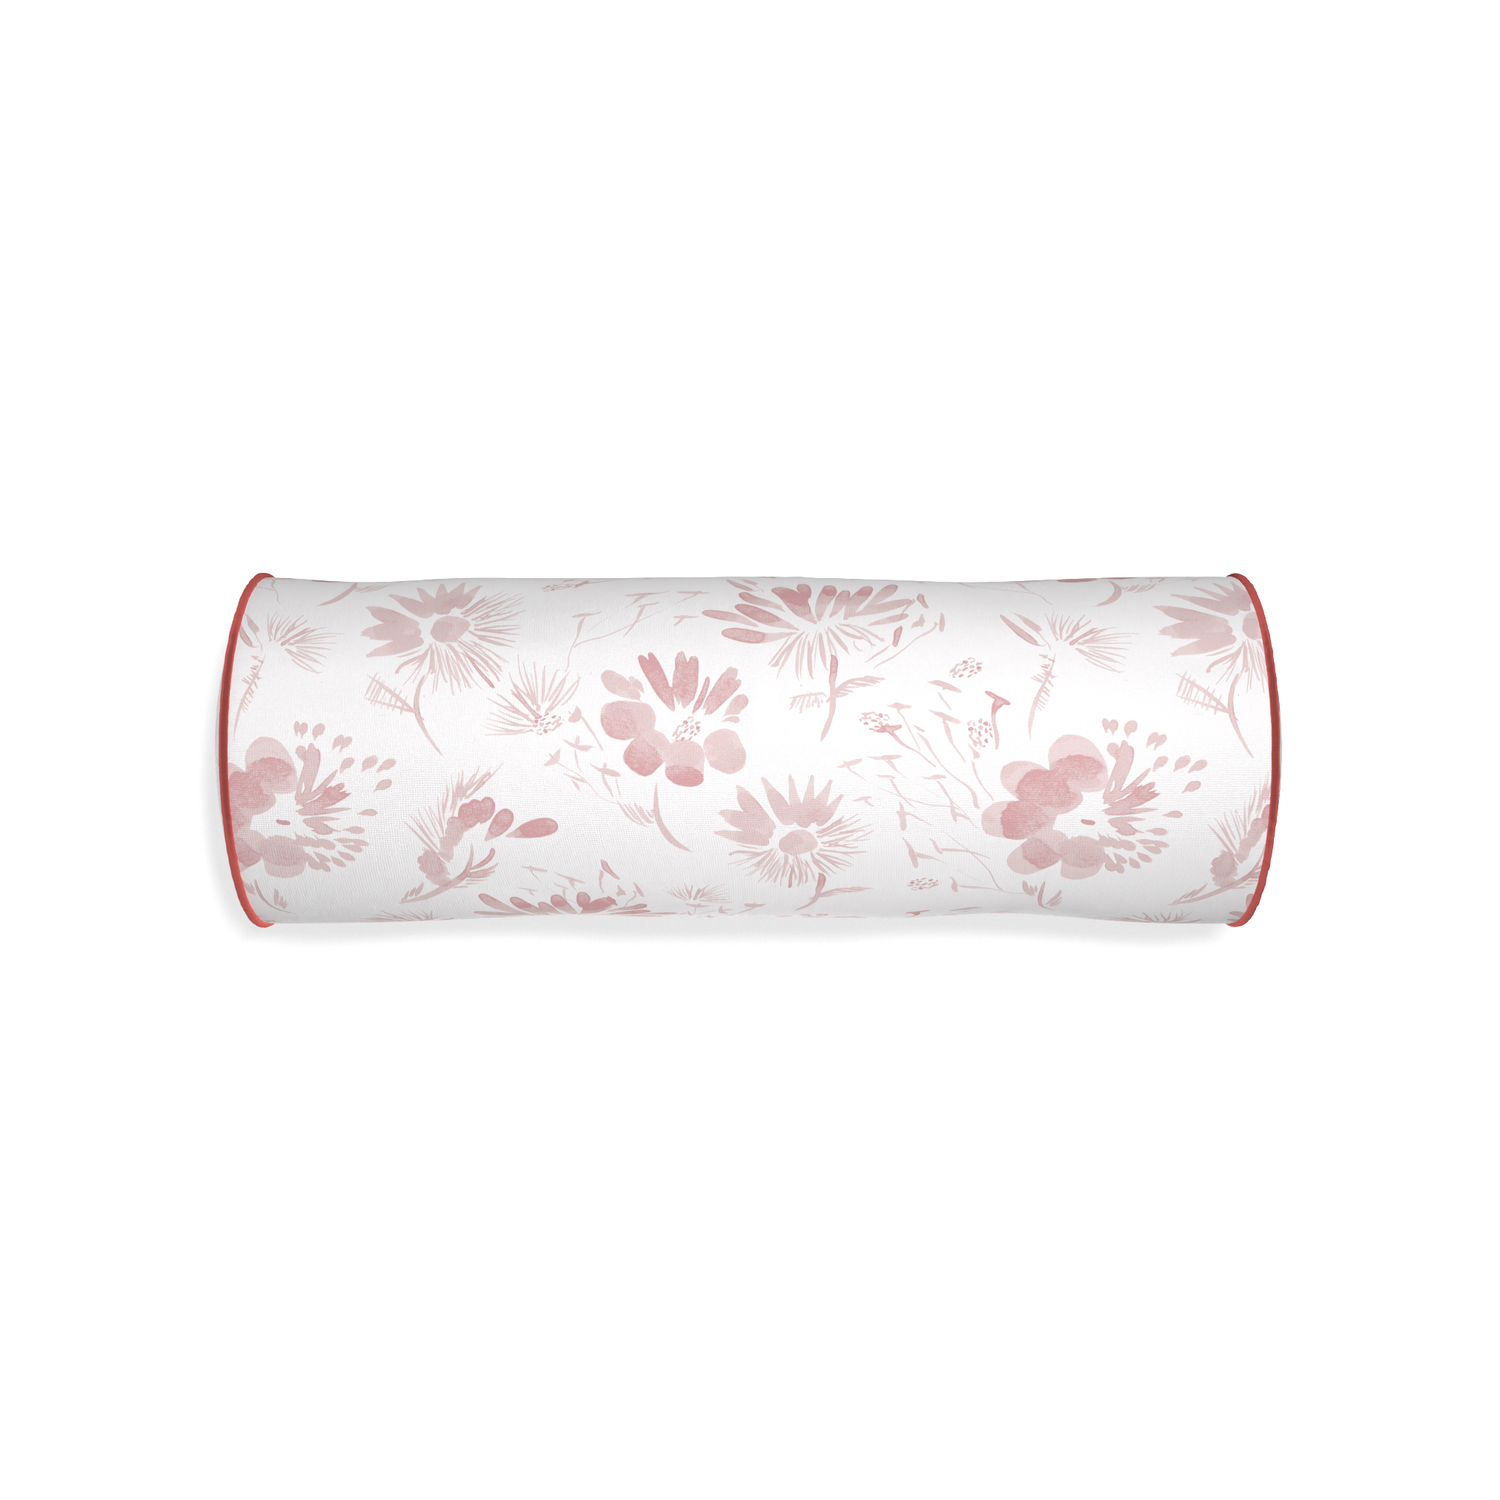 Bolster blake custom pink floralpillow with c piping on white background